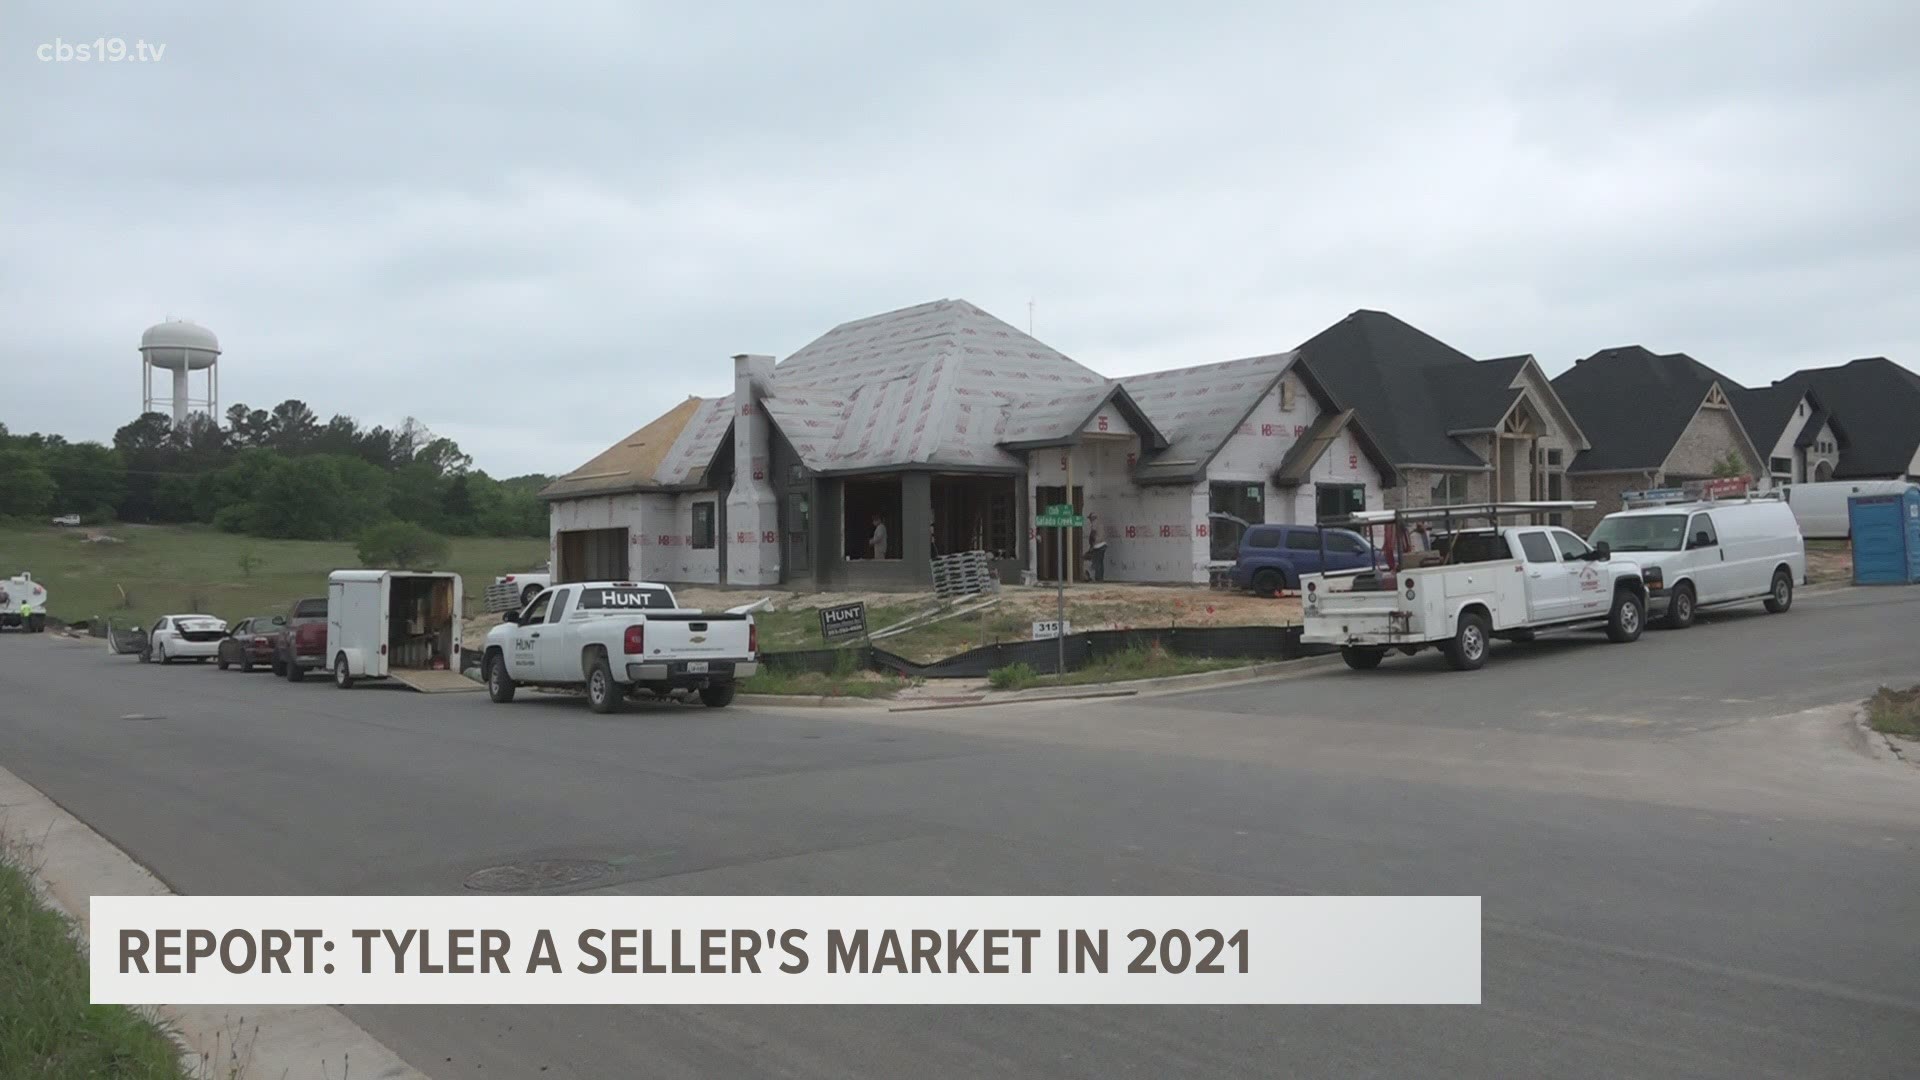 Despite the pandemic, last summer home sales increased by about 15% compared to 2019 and 2018.